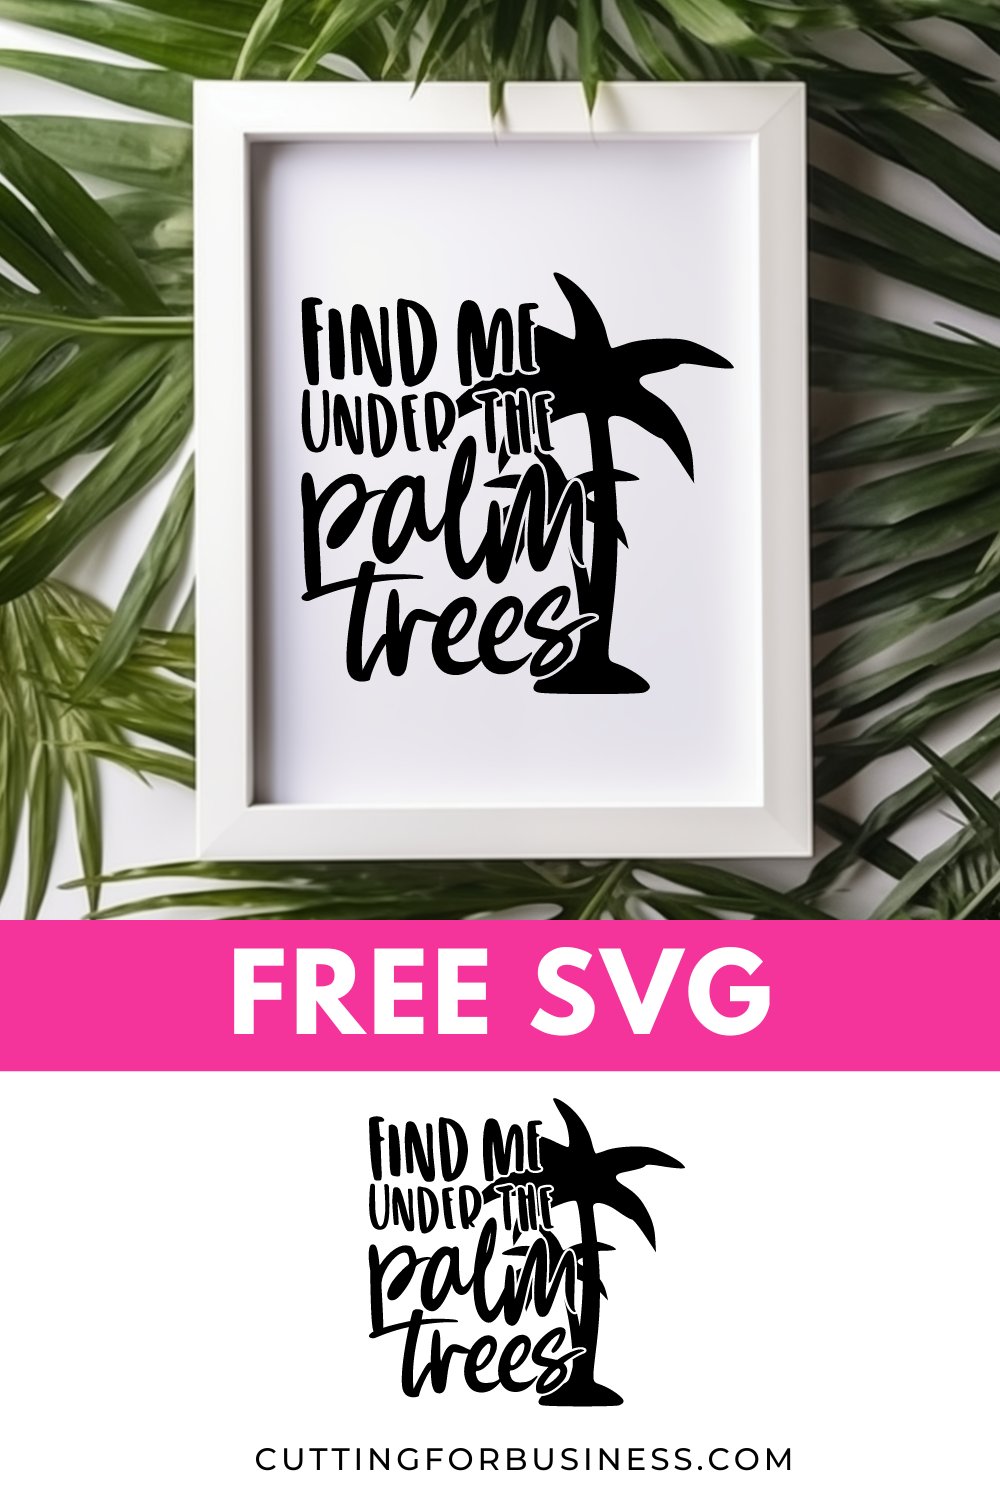 Free Summer SVG - Find Me Under the Palm Trees - cuttingforbusiness.com